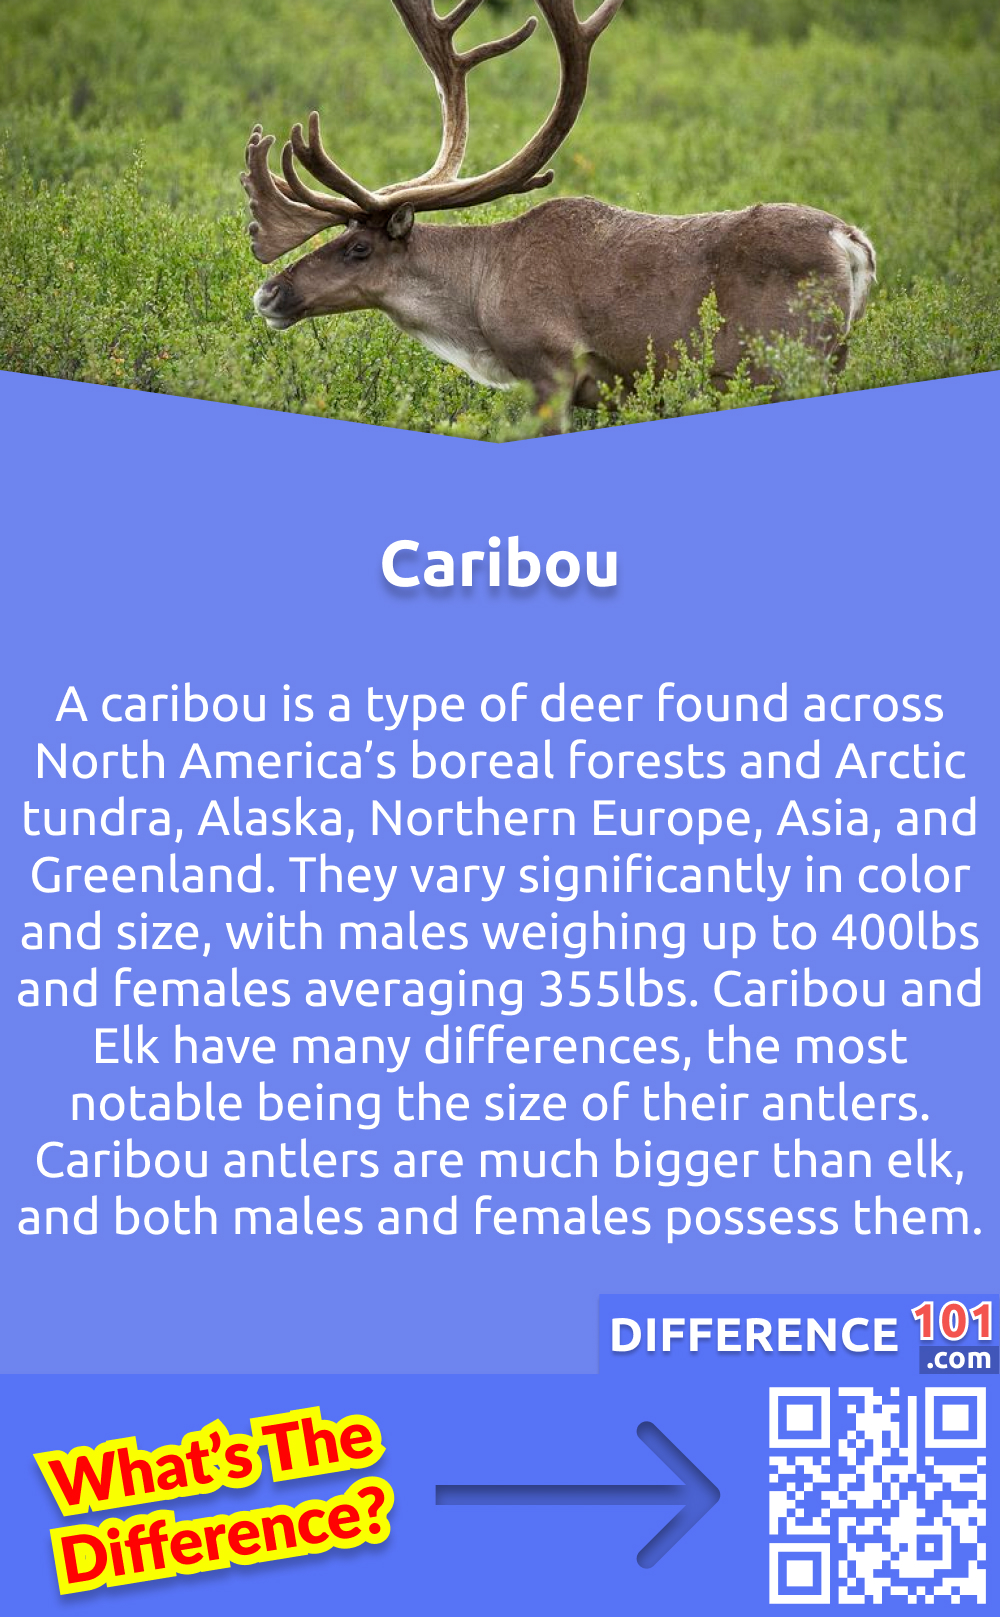 What is a Caribou? A caribou is a type of deer found across North America’s boreal forests and Arctic tundra, Alaska, Northern Europe, Asia, and Greenland. They vary significantly in color and size, with males weighing up to 400lbs and females averaging 355lbs. Caribou and Elk have many differences, the most notable being the size of their antlers. Caribou antlers are much bigger than elk, and both males and females possess them.